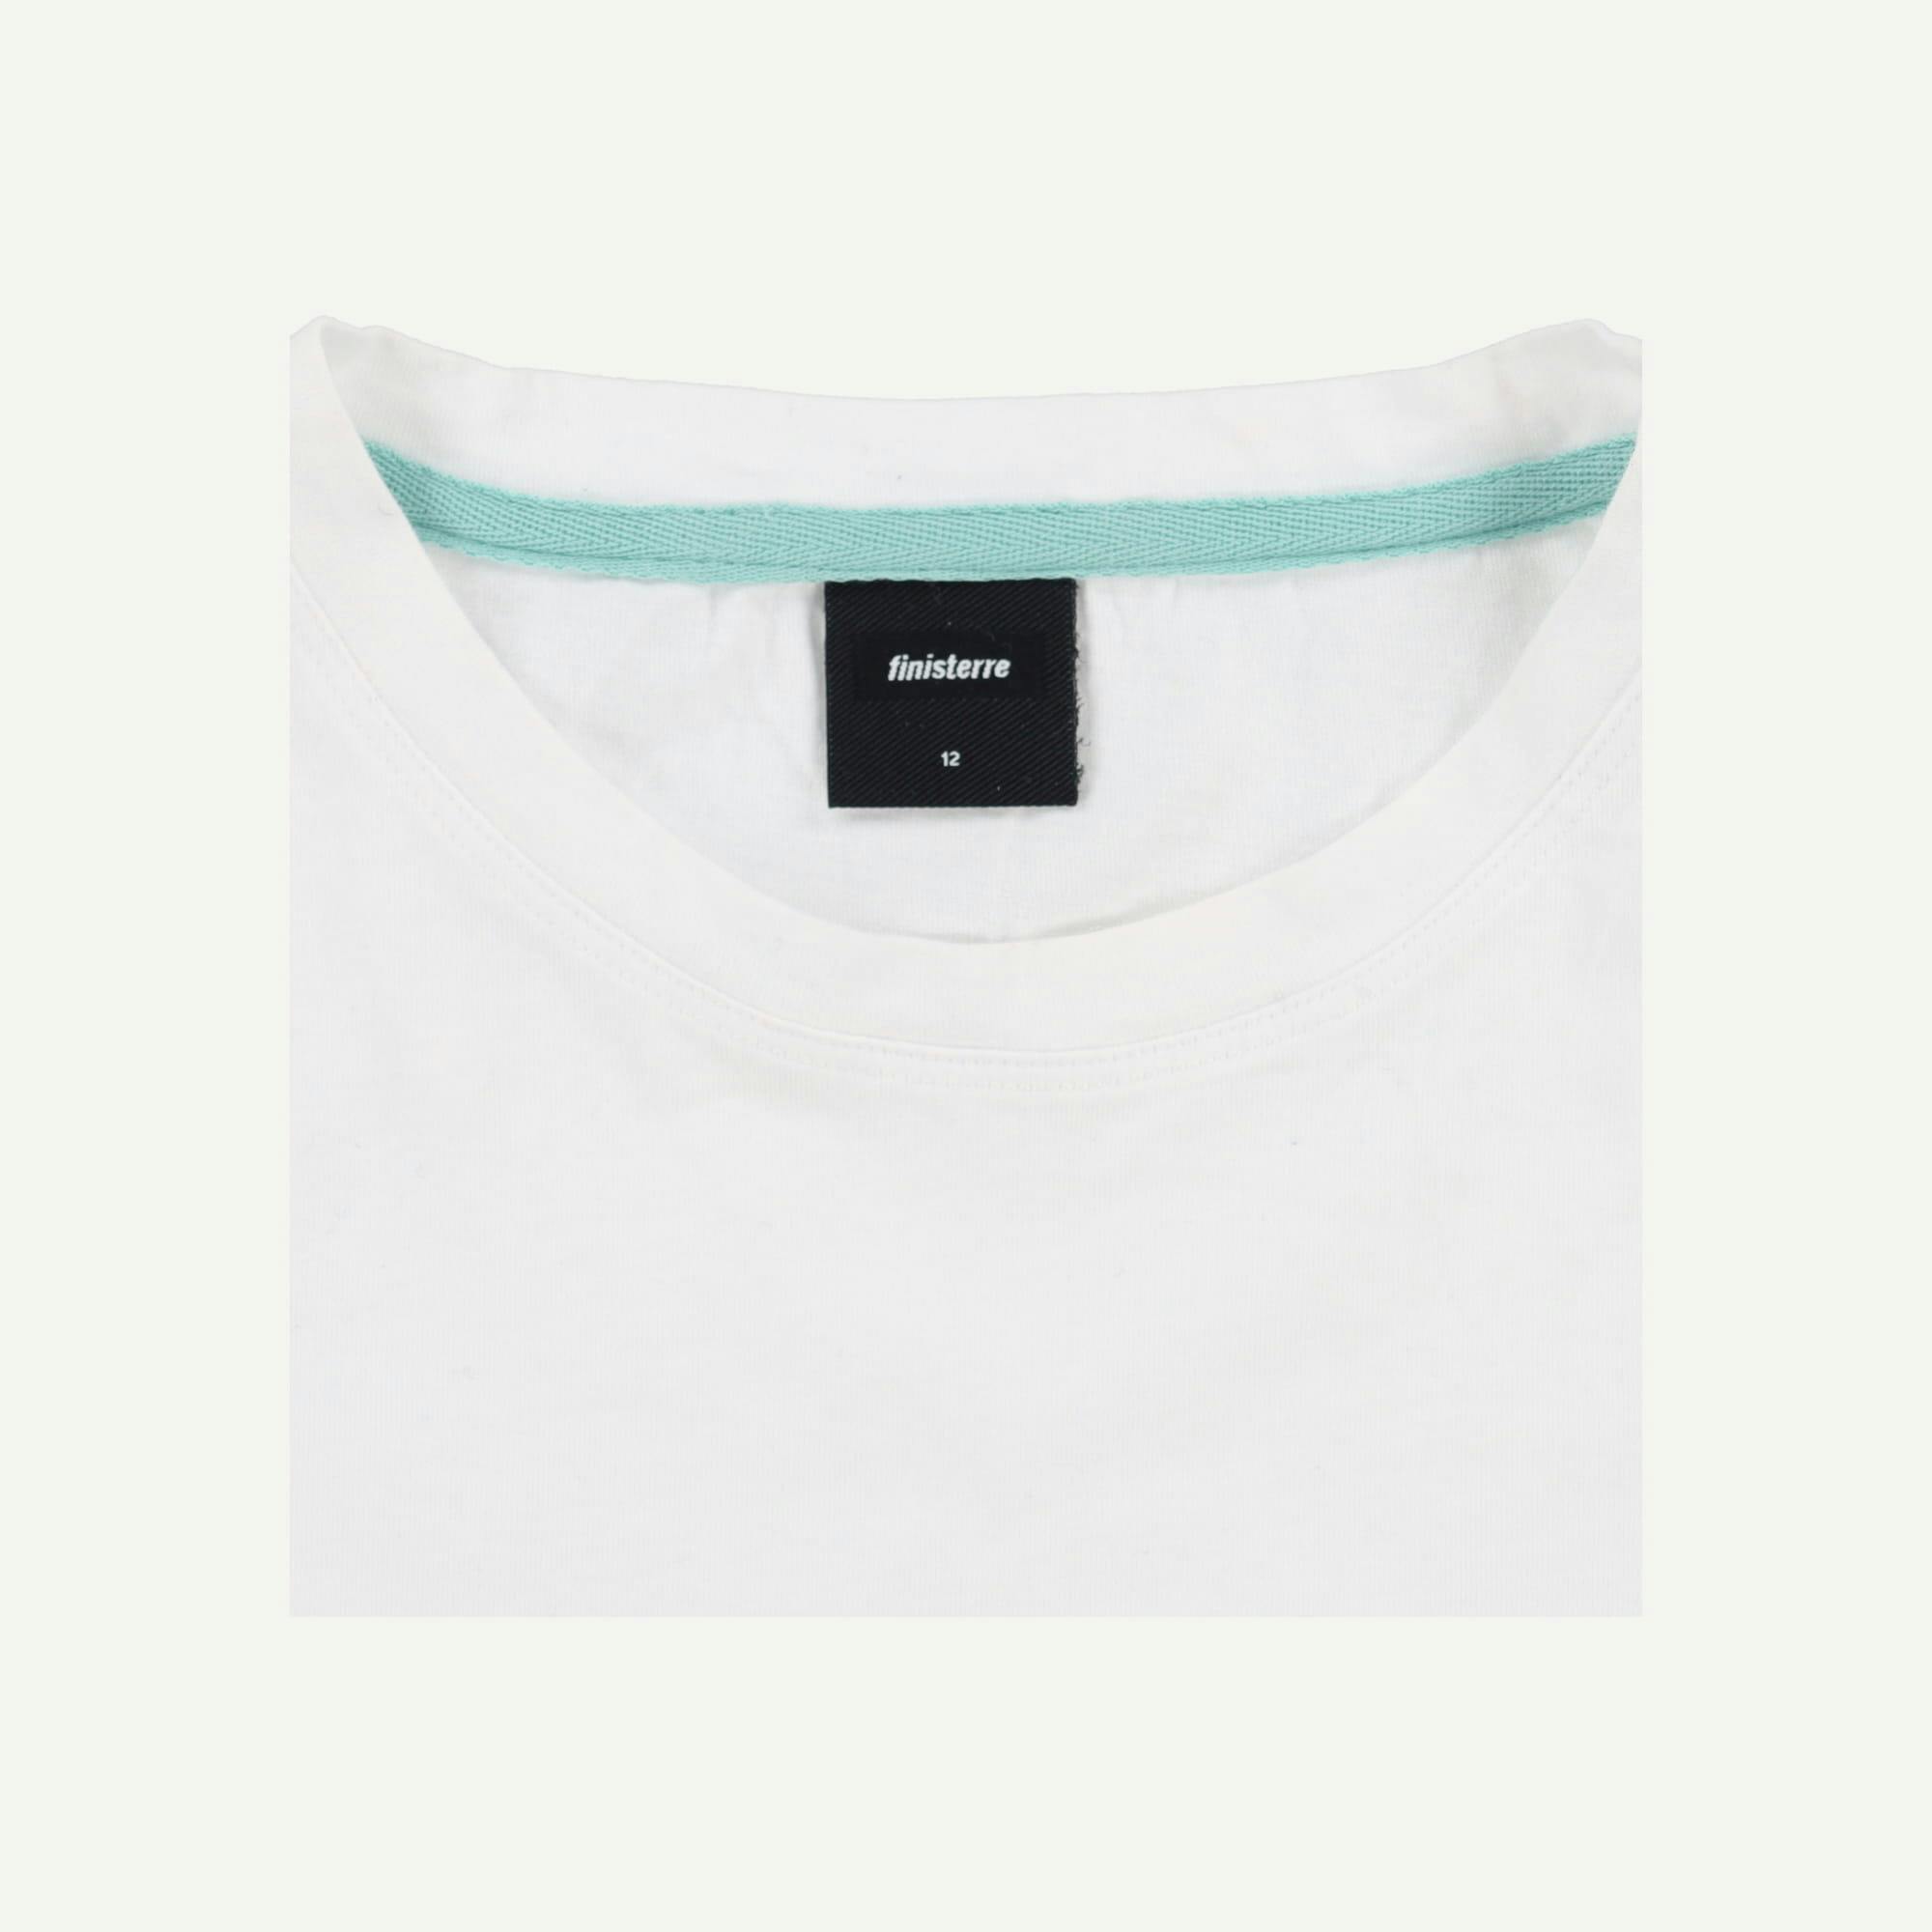 Finisterre Repaired White T-shirt